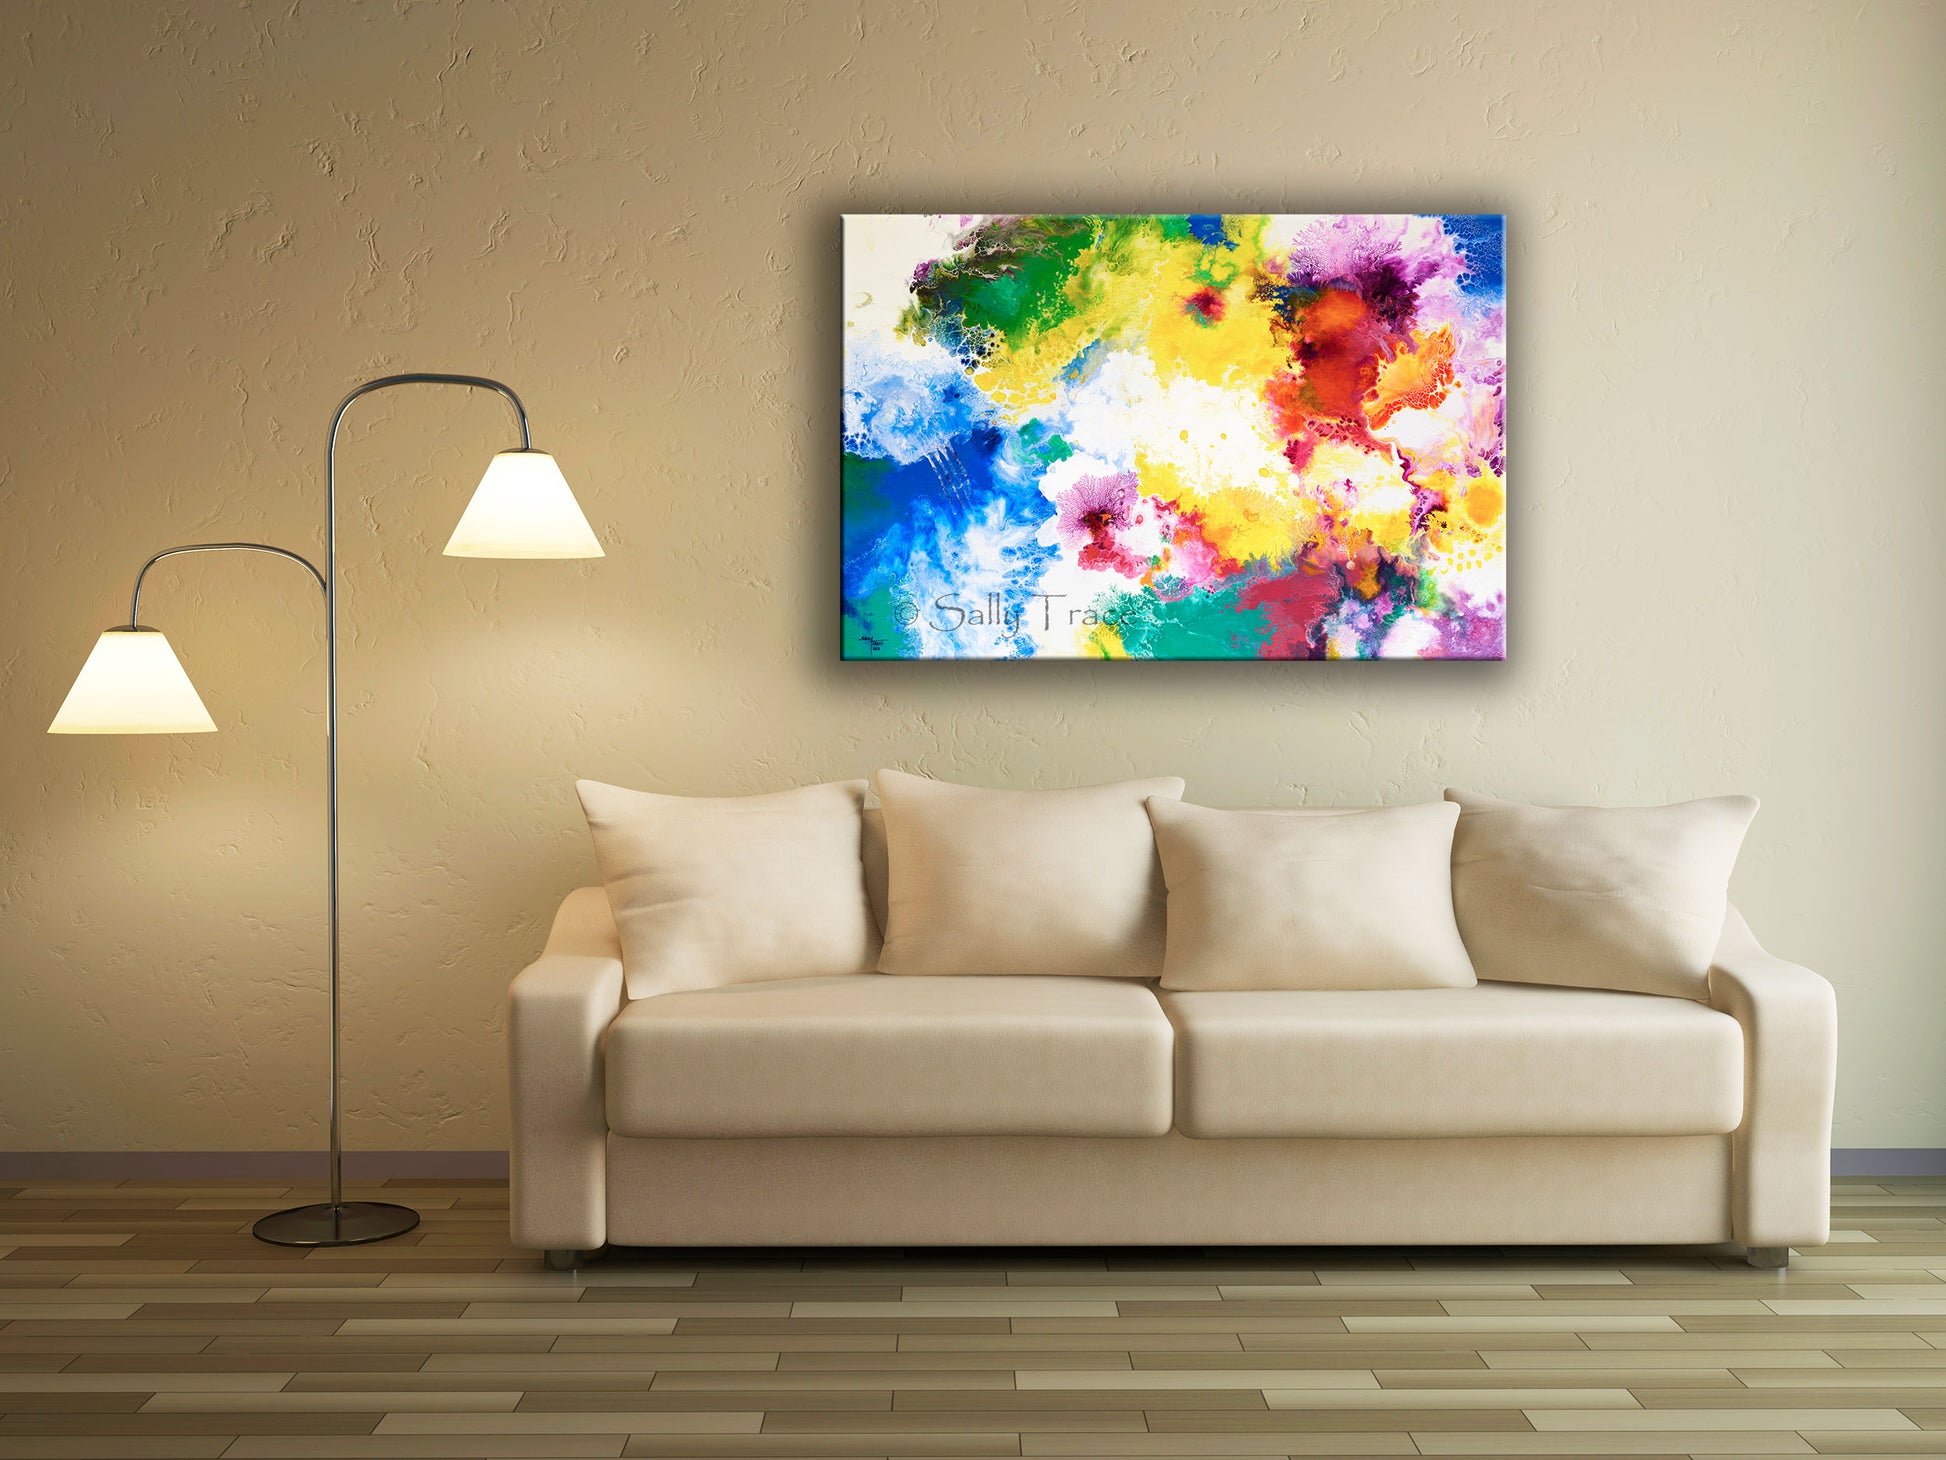 Nebula 35 by Sally Trace, fine art giclee print of my abstract fluid art space painting